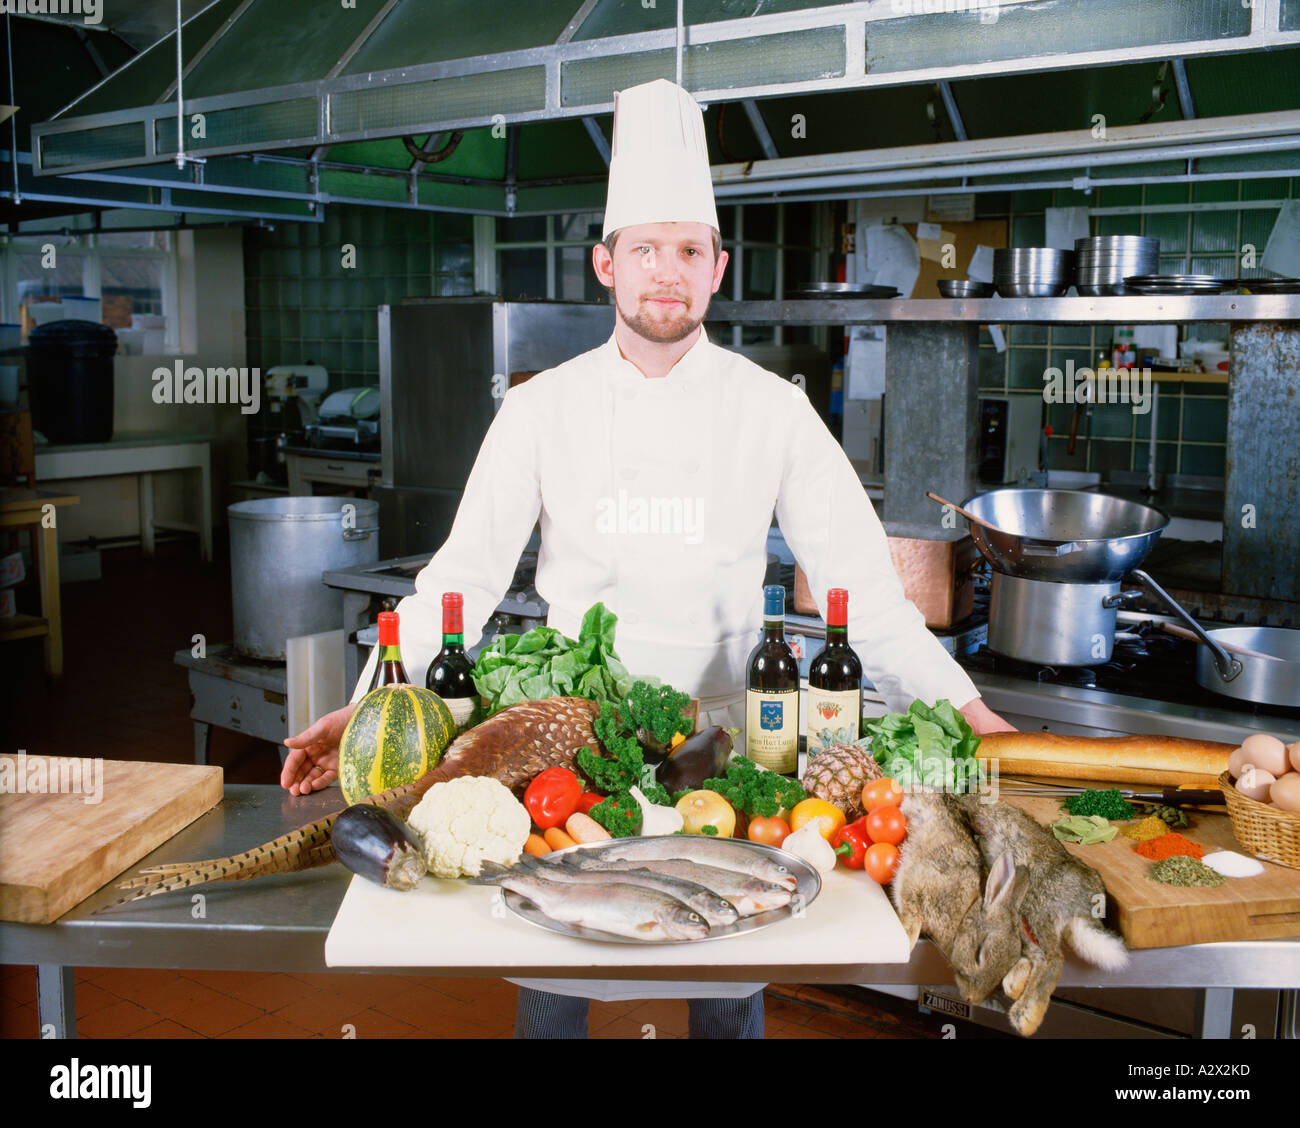 Professional Chef in Hotel Kitchen with display of fresh local produce. Stock Photo